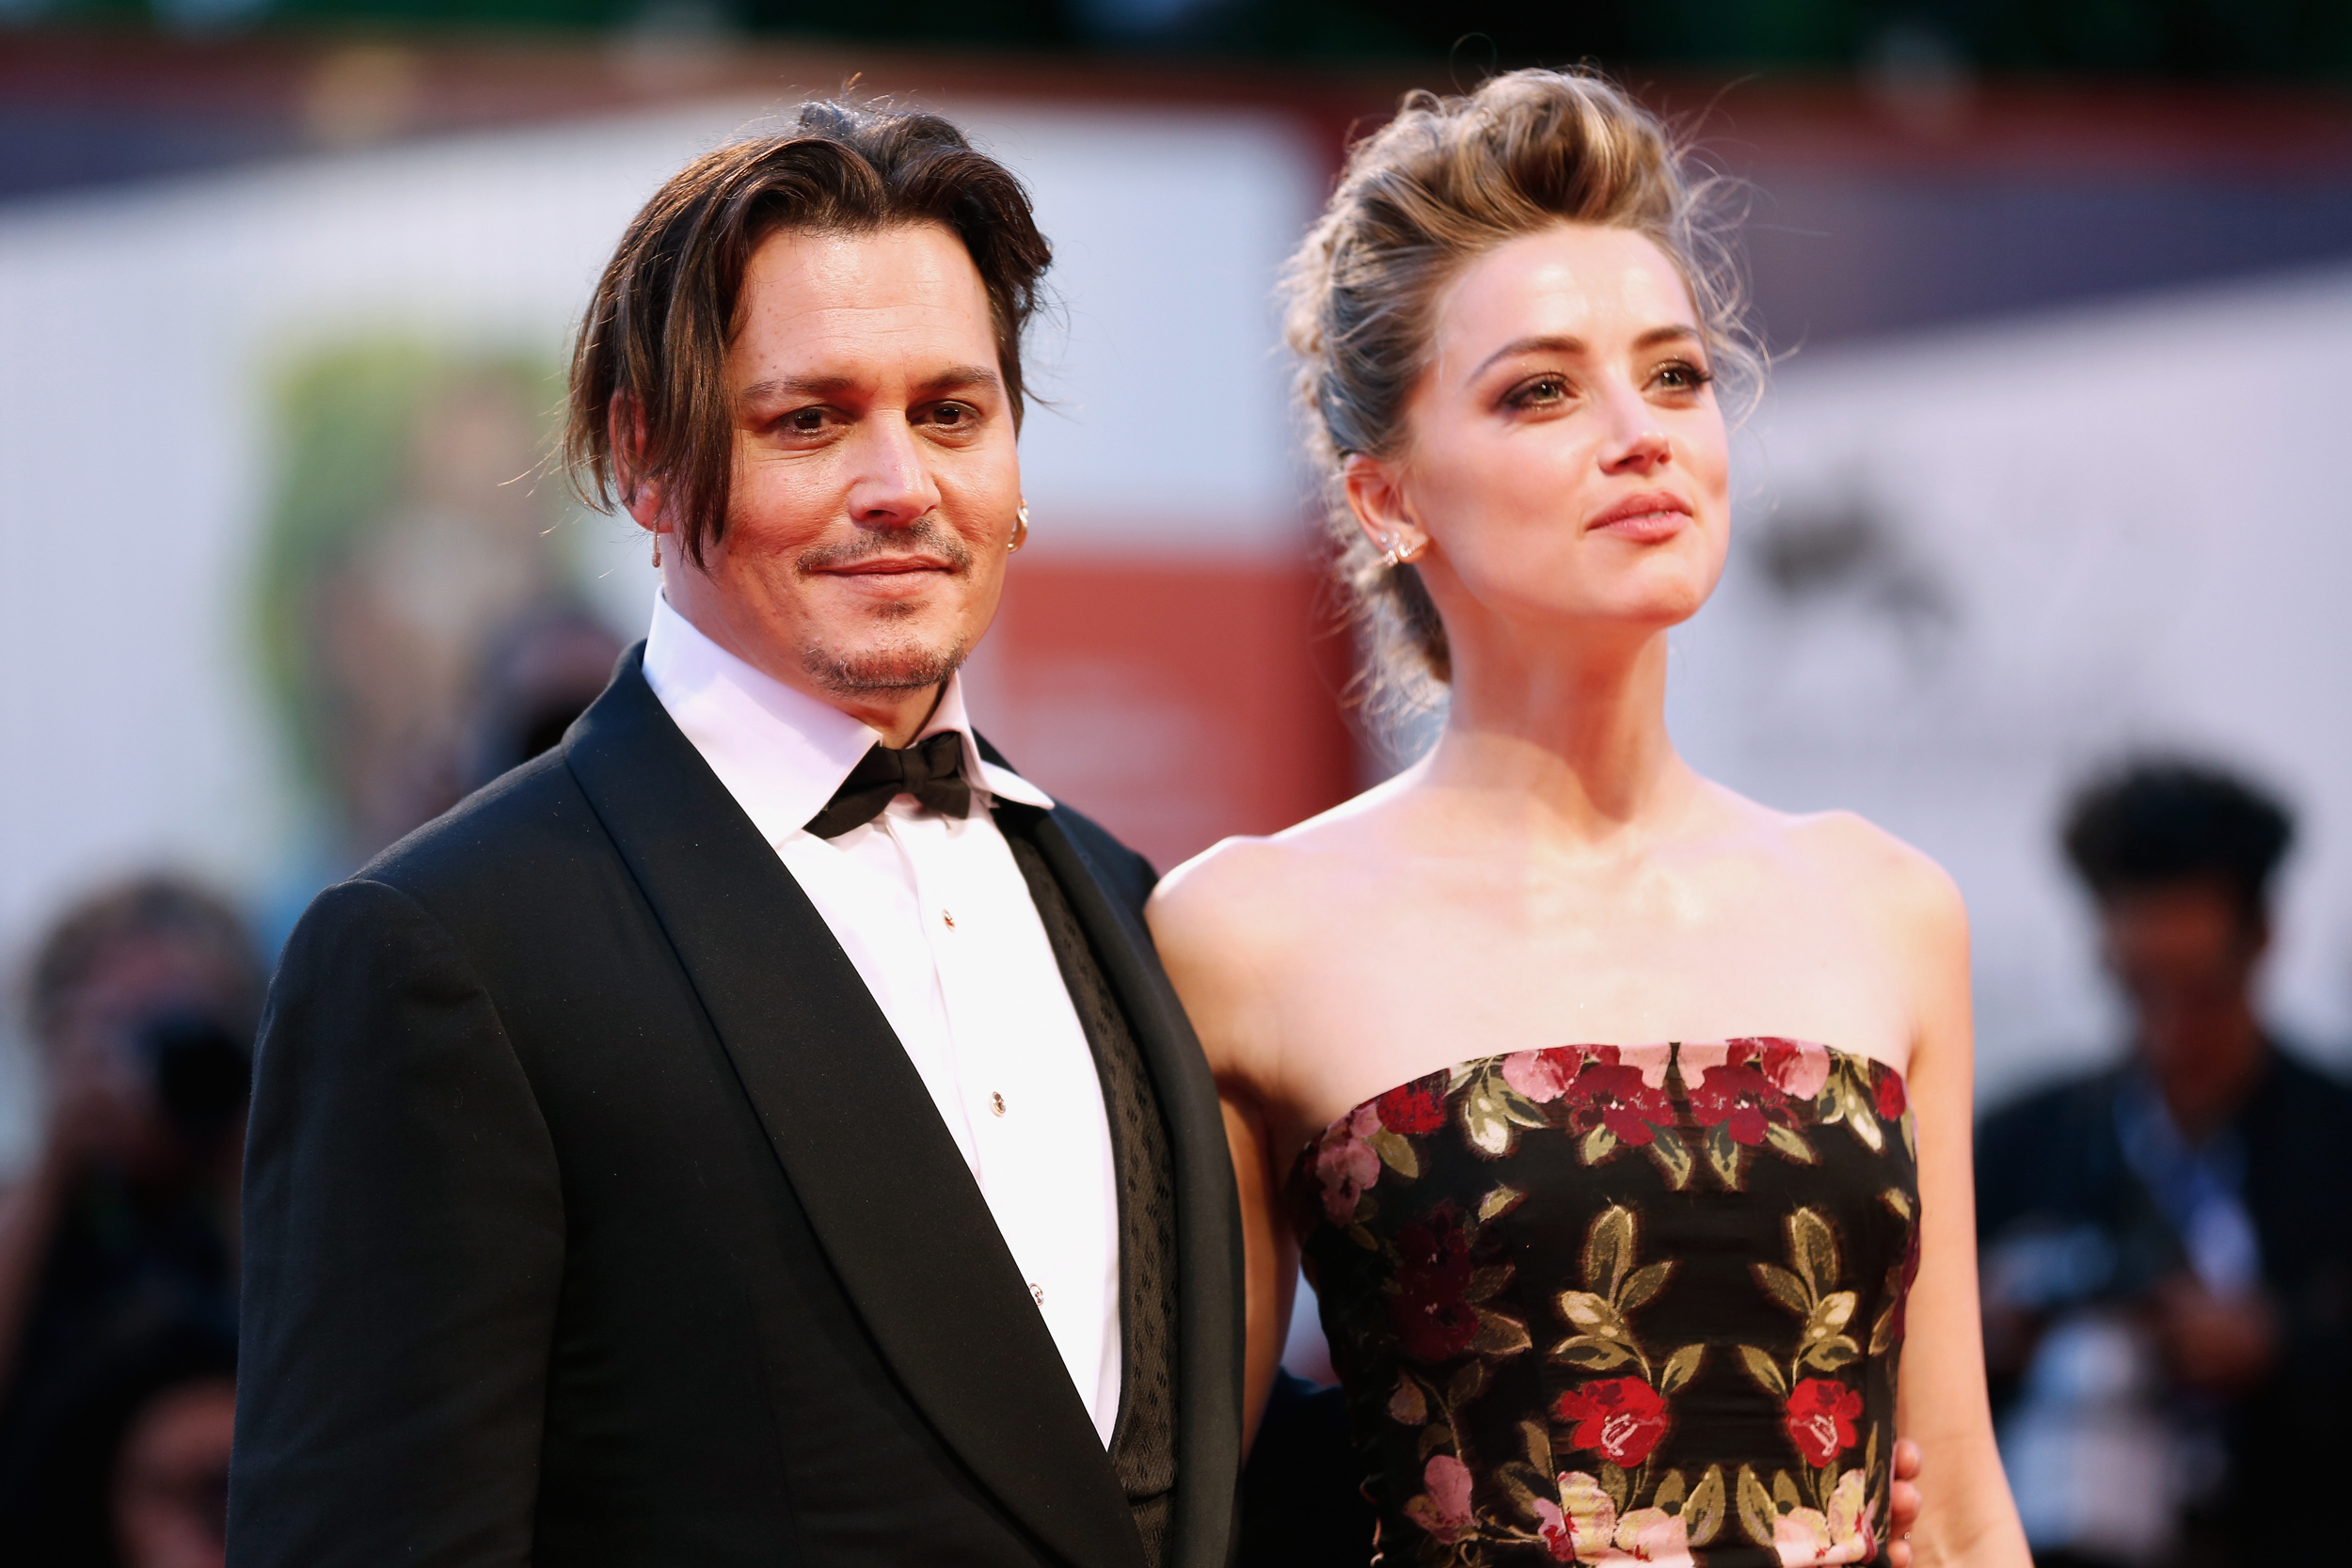 VENICE, ITALY - SEPTEMBER 05:  Johnny Depp and actress Amber Heard attend a premiere for 'The Danish Girl' during the 72nd Venice Film Festival at  on September 5, 2015 in Venice, Italy.  (Photo by Tristan Fewings/Getty Images)